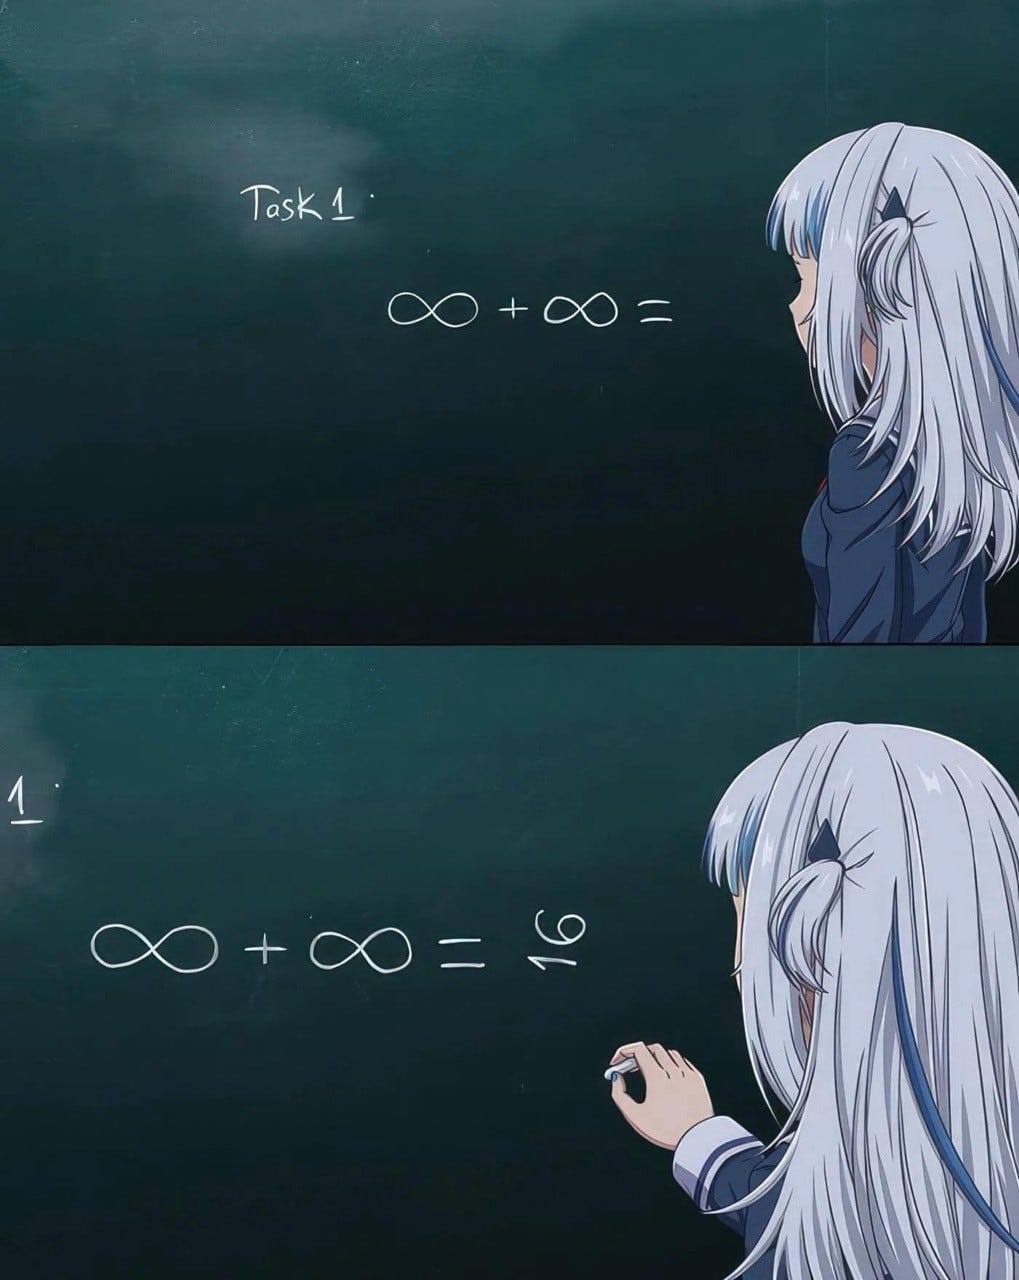 Top: An anime character looks at a challenge set on a blackboard. It reads:
Task 1

∞ + ∞ =

Bottom: They write the answer as 16, but with the number turned sideways so that the ∞ symbol are read as the numeral 8.